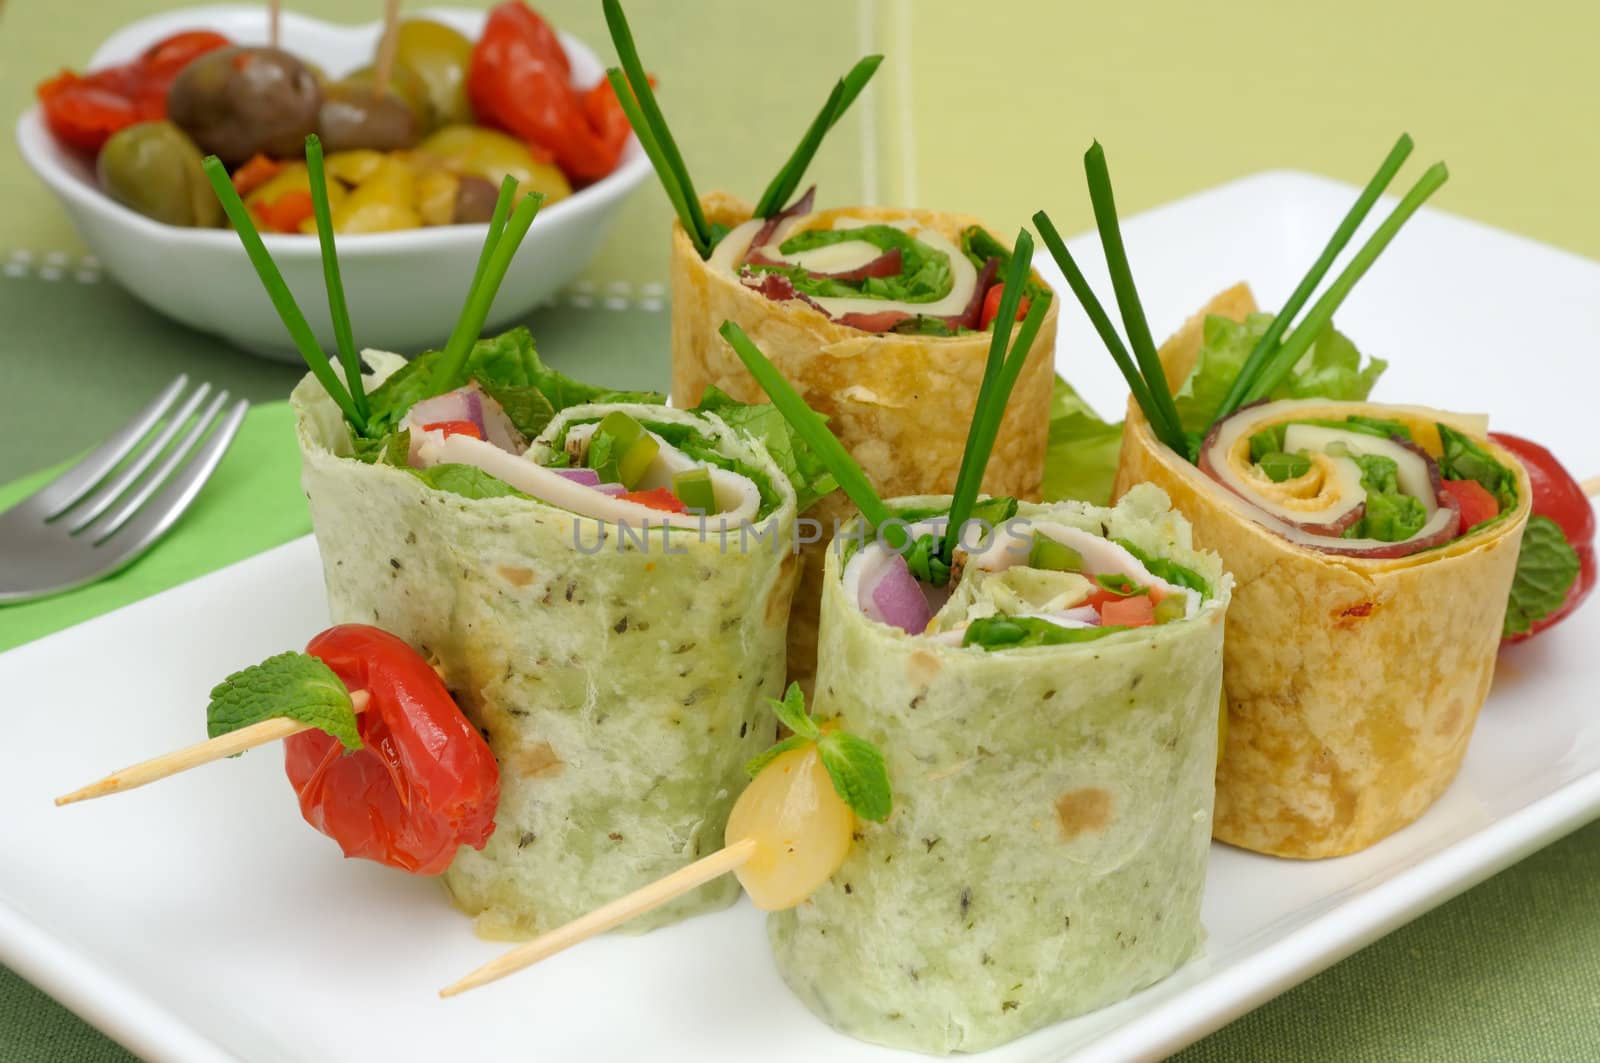 Brochettes made of colored tortillas, cheese, chicken slices and vegetable